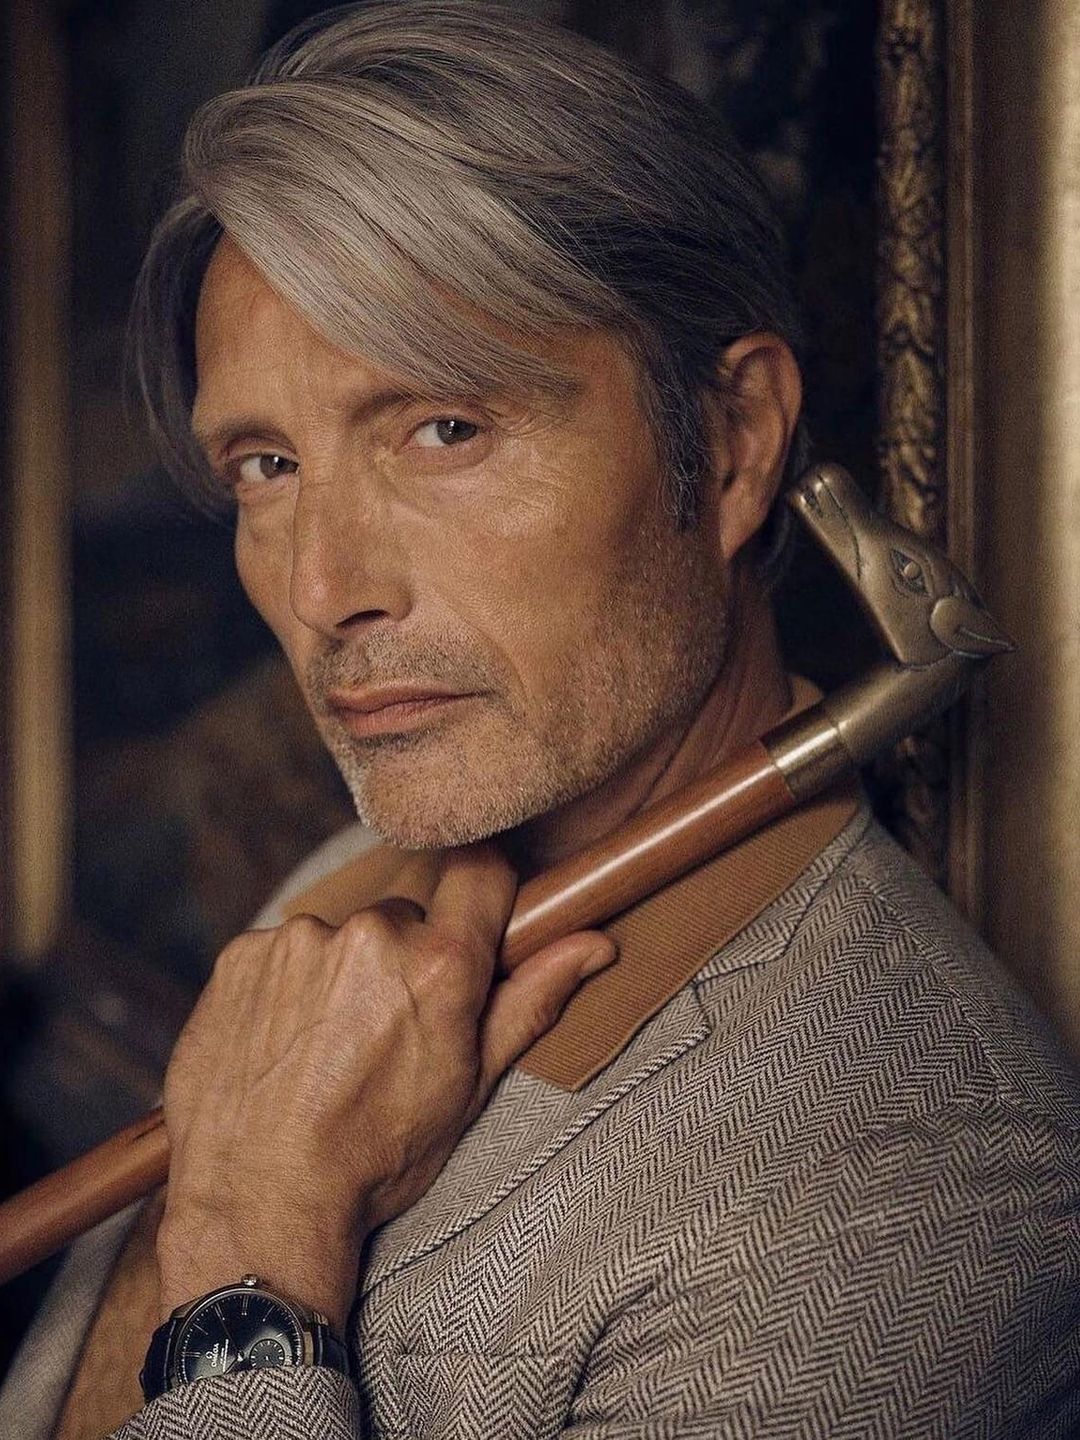 Mads Mikkelsen how did he became famous